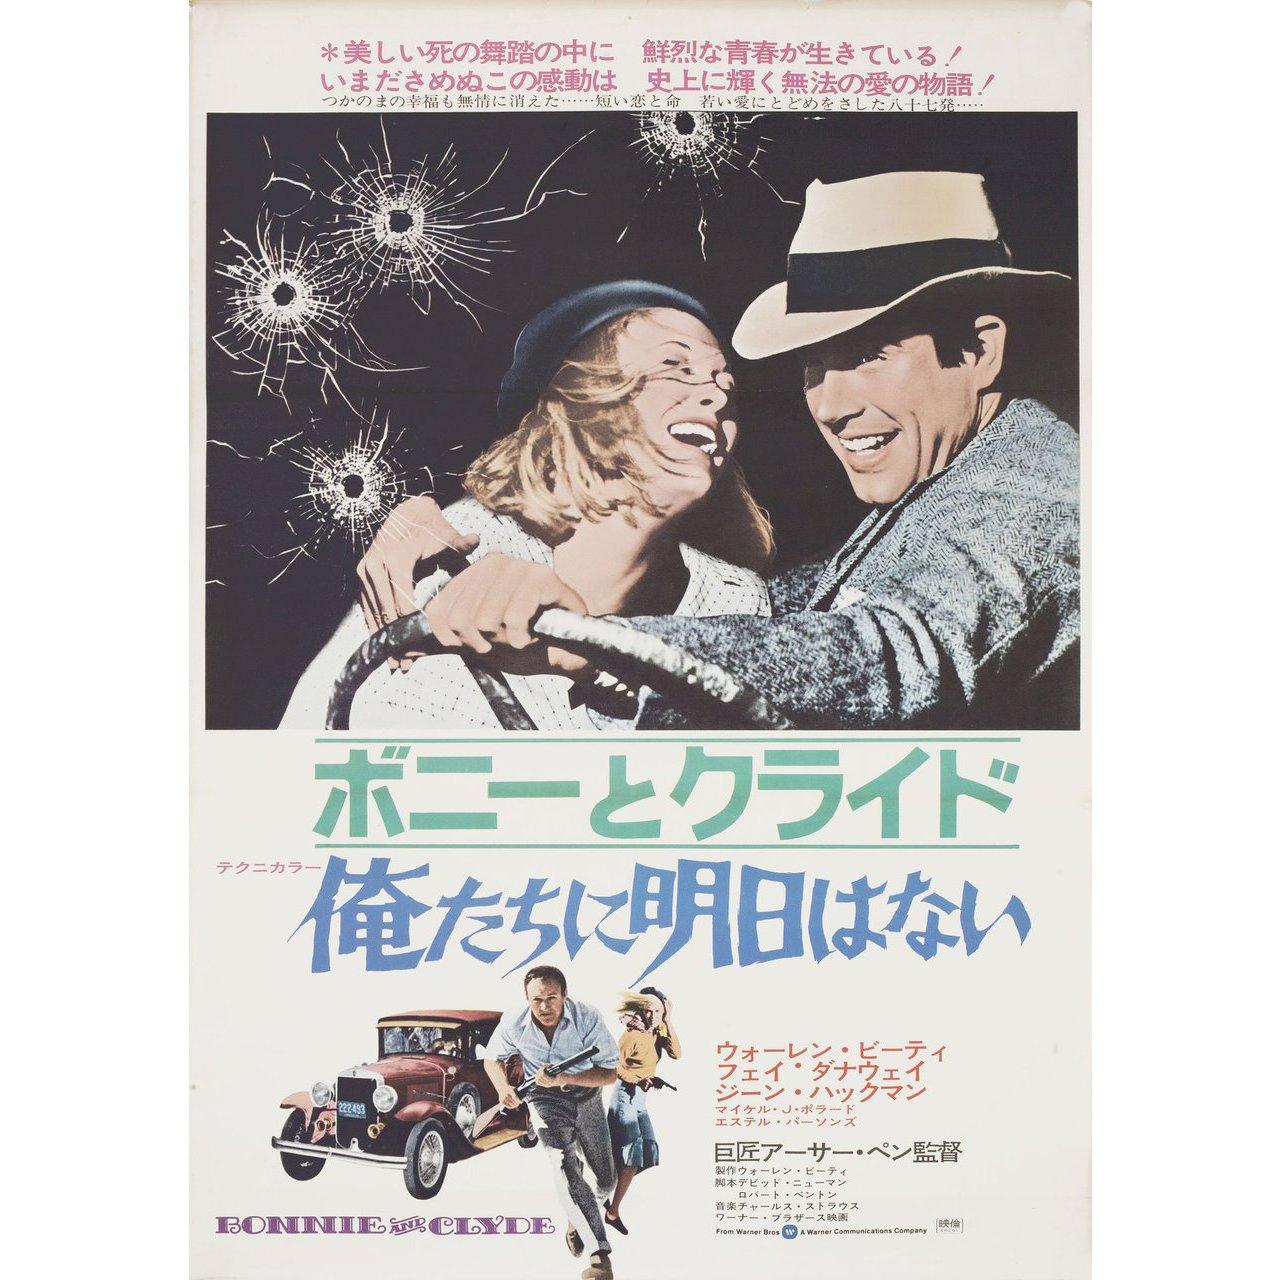 Original 1973 re-release Japanese B2 poster for the 1967 film Bonnie and Clyde directed by Arthur Penn with Warren Beatty / Faye Dunaway / Michael J. Pollard / Gene Hackman. Very Good-Fine condition, rolled. Please note: the size is stated in inches